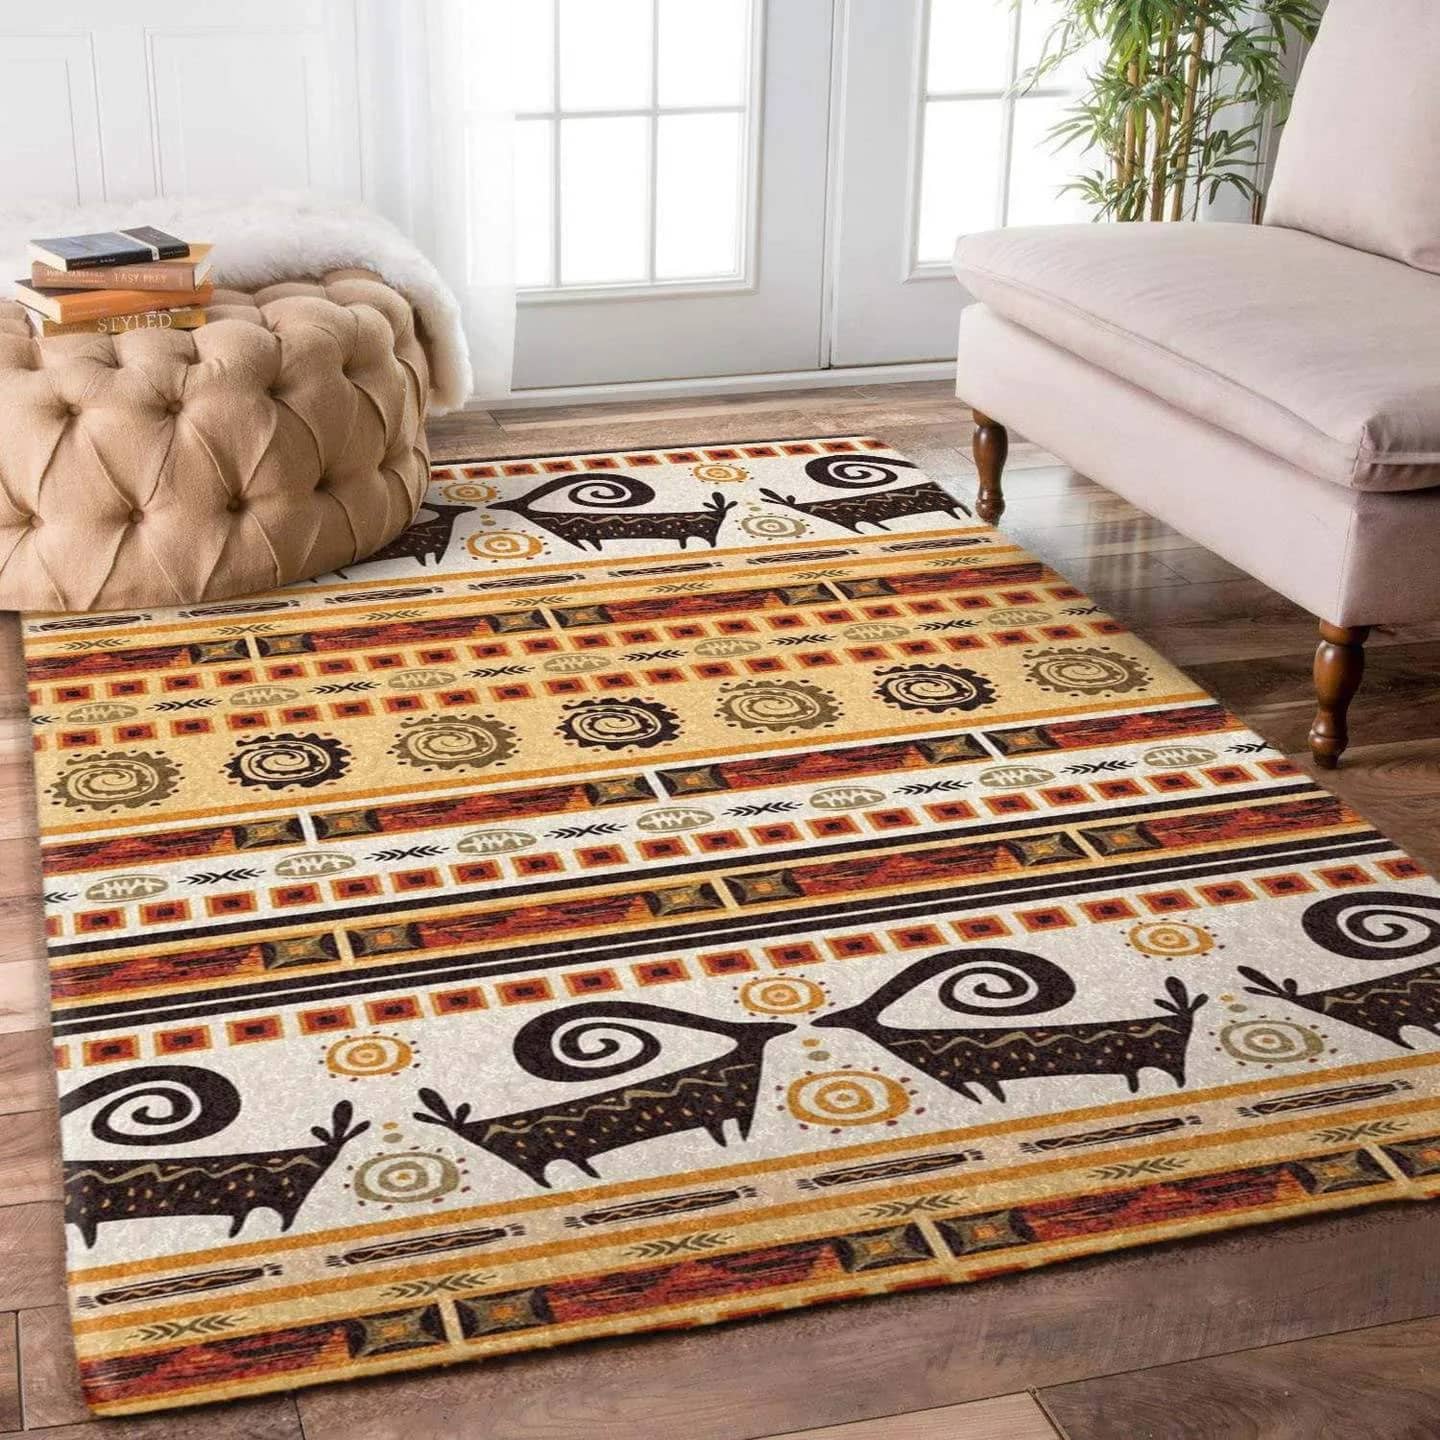 African Limited Edition Amazon Best Seller Sku 267168 Rug